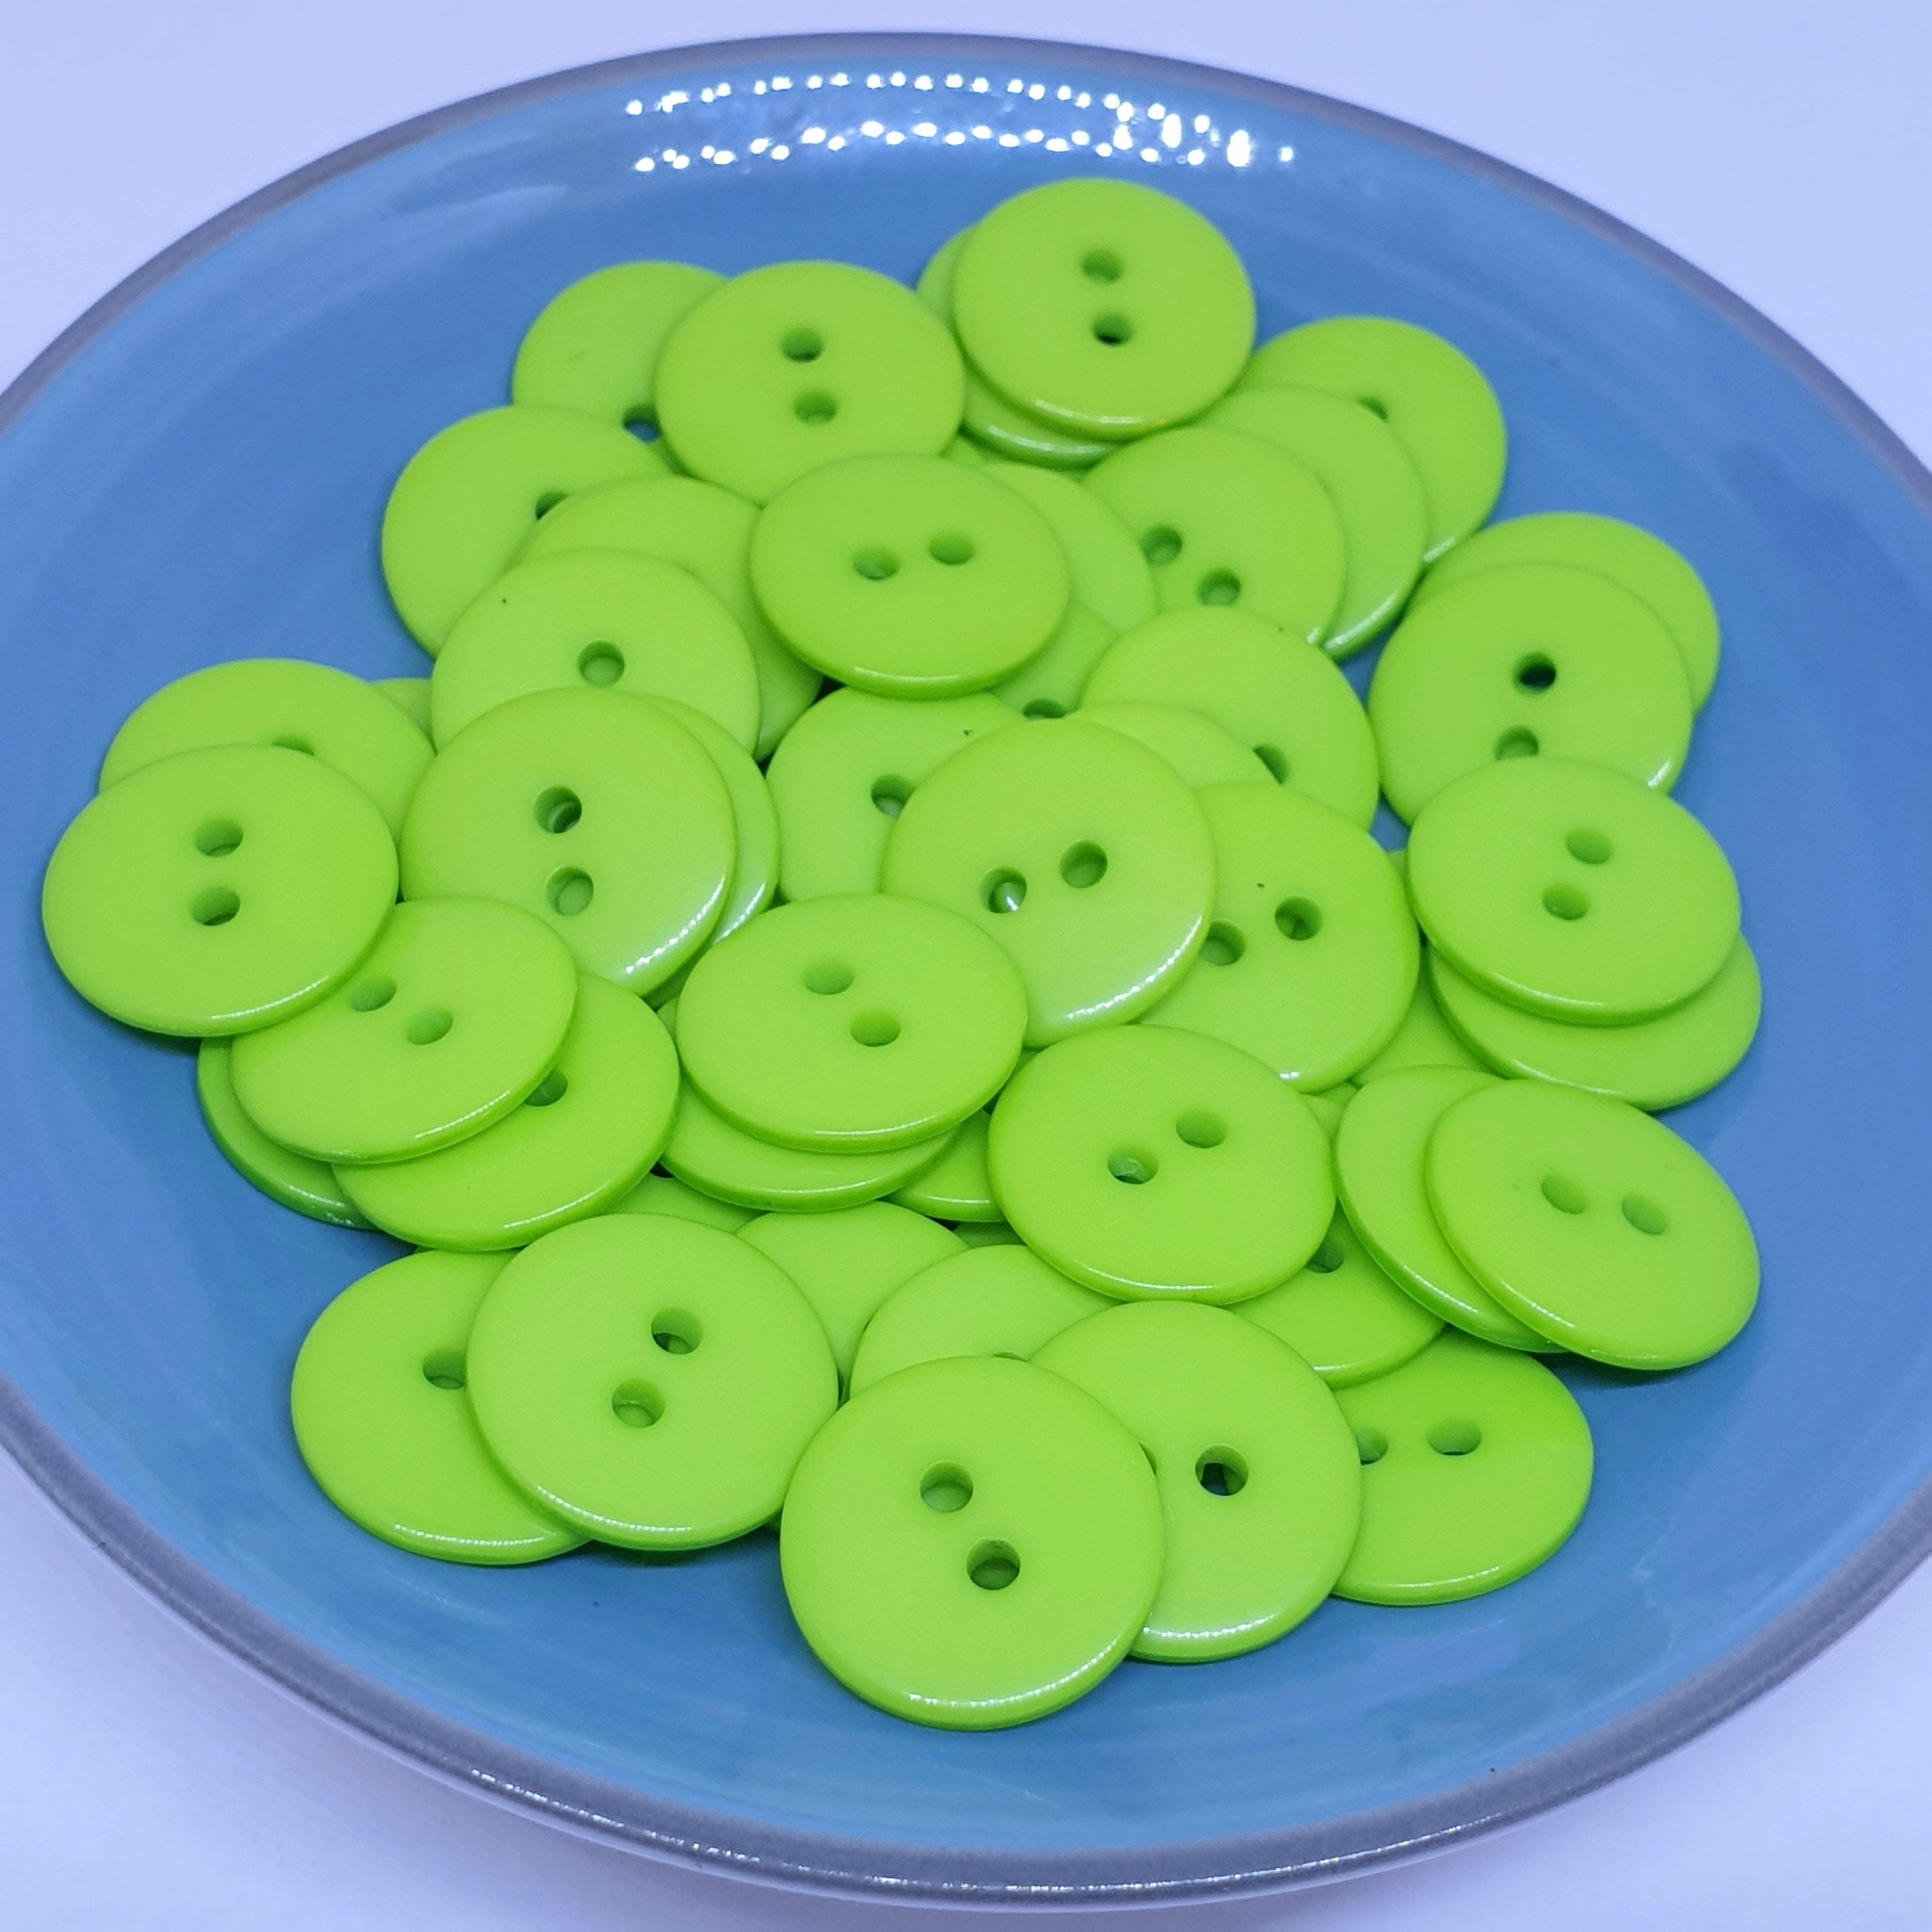 MajorCrafts 72pcs 15mm Apple Green 2 Holes Round Resin Sewing Buttons